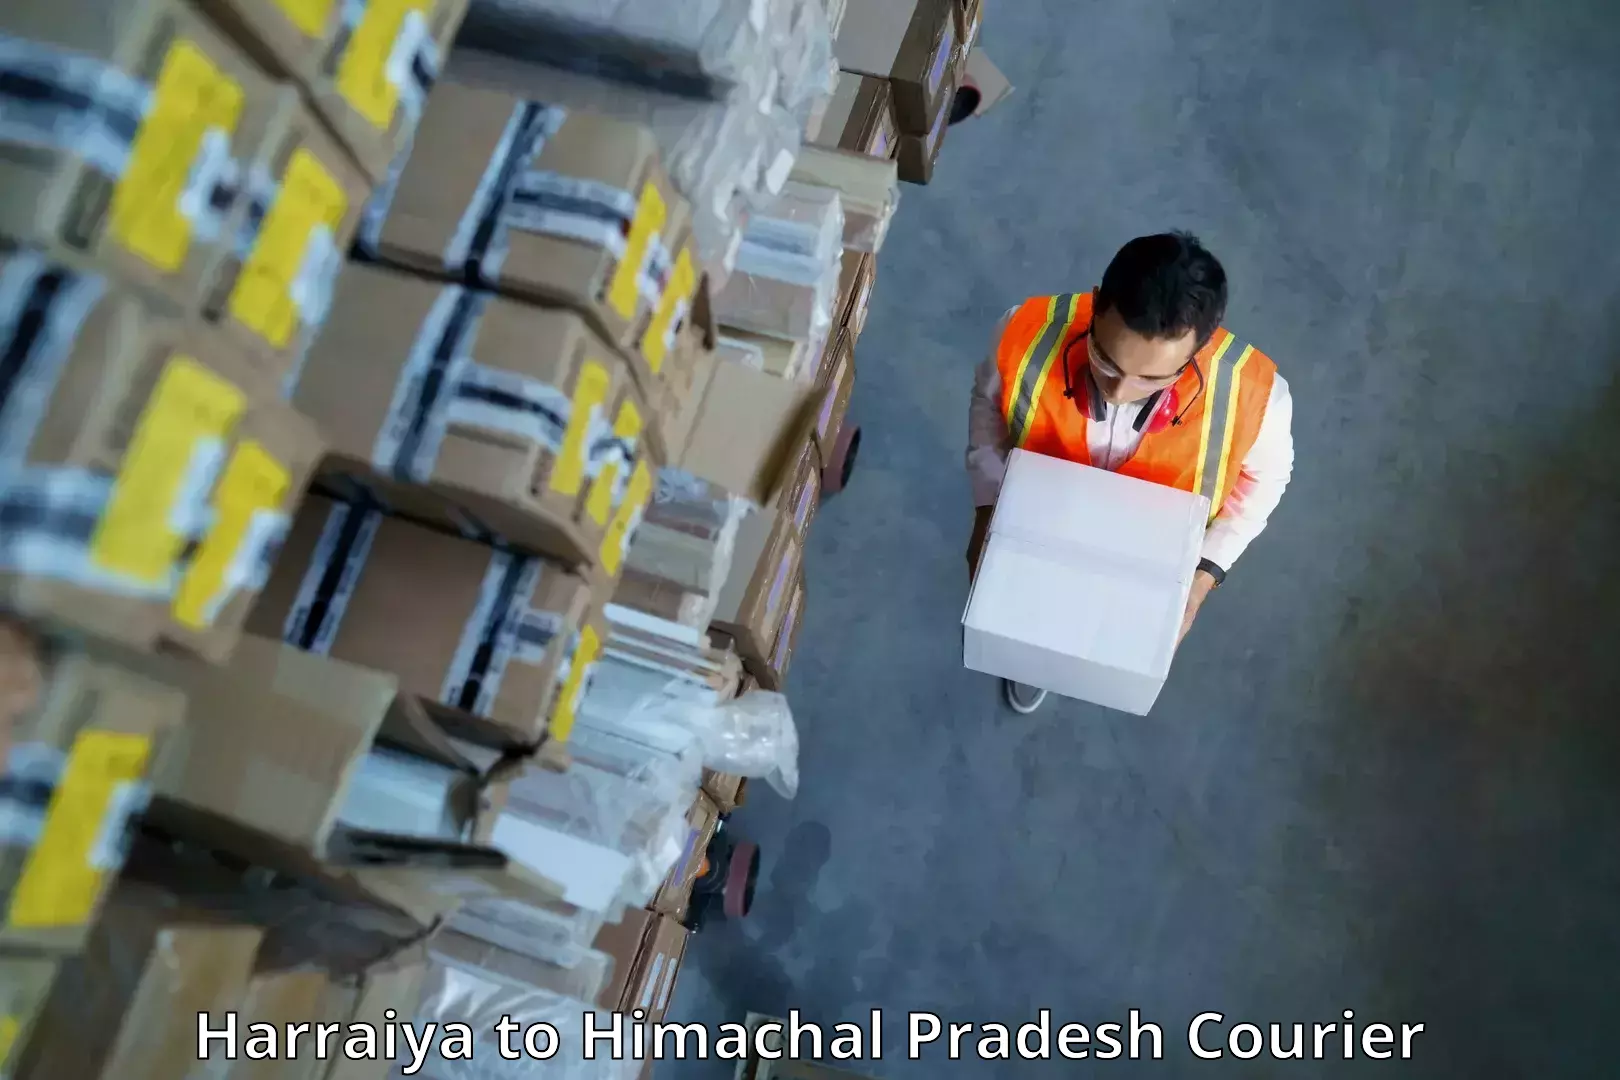 Expedited shipping methods Harraiya to YS Parmar University of Horticulture and Forestry Solan